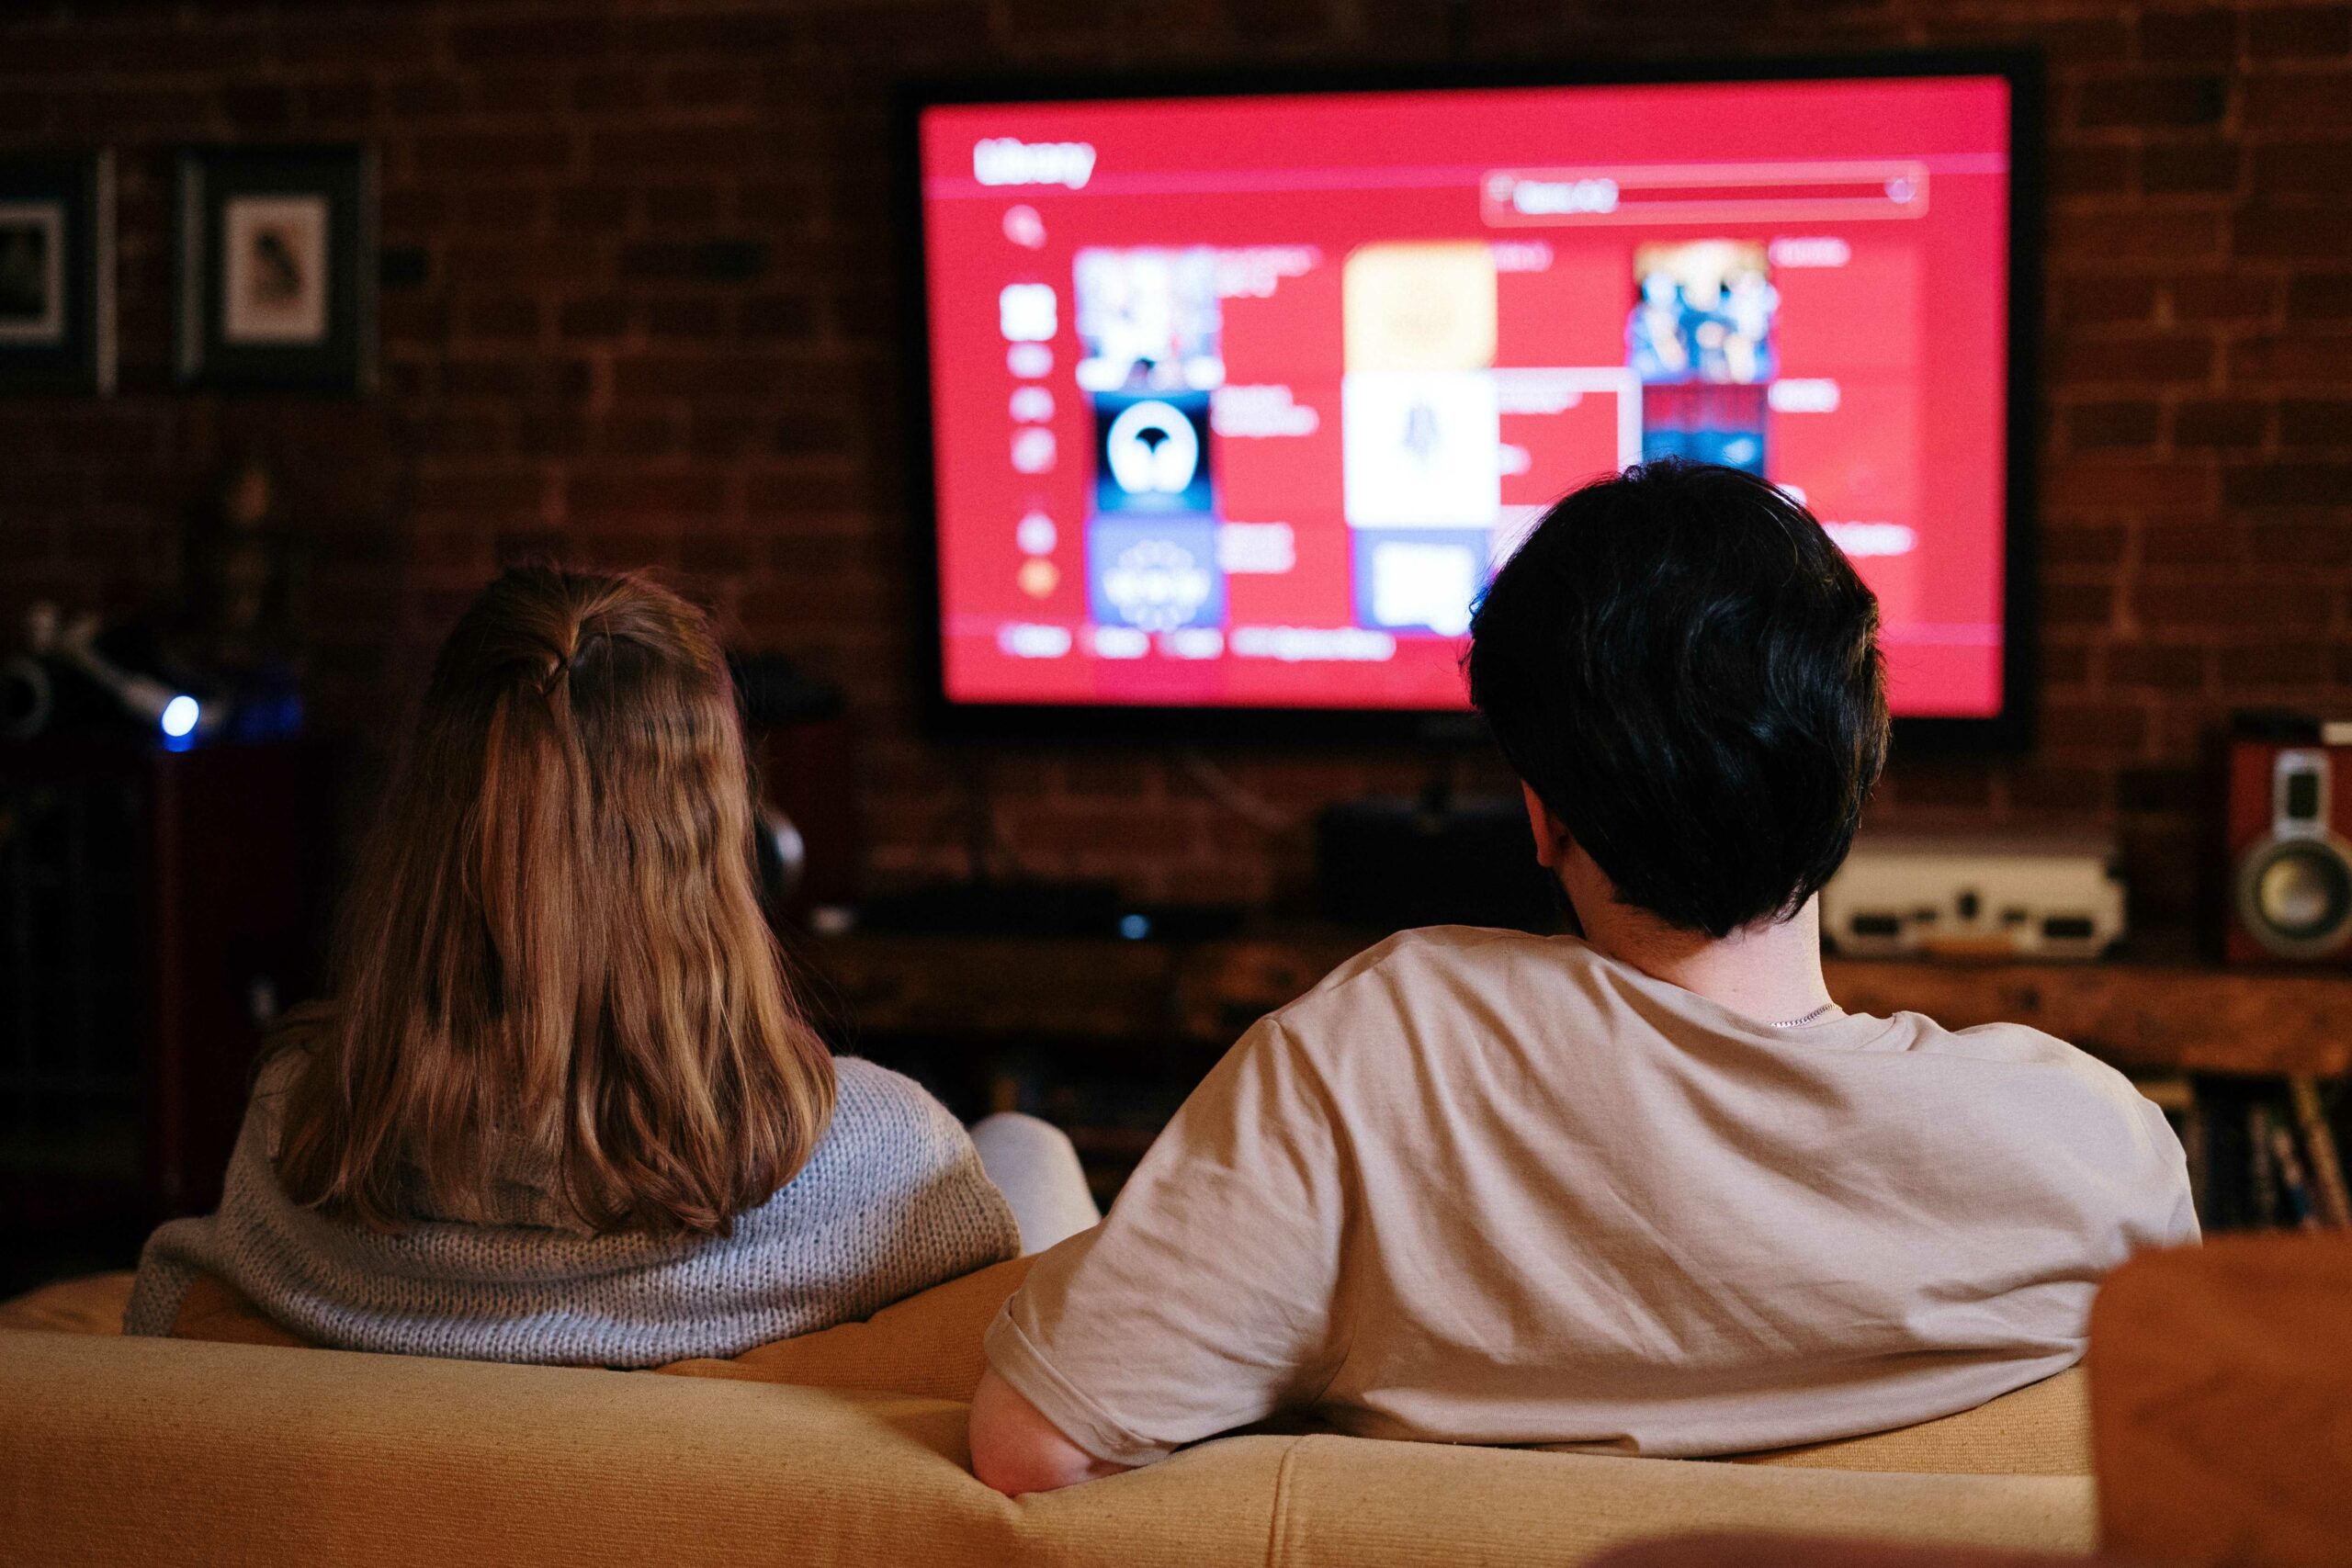 Couple on sofa using remote control to select which programme to stream on TV